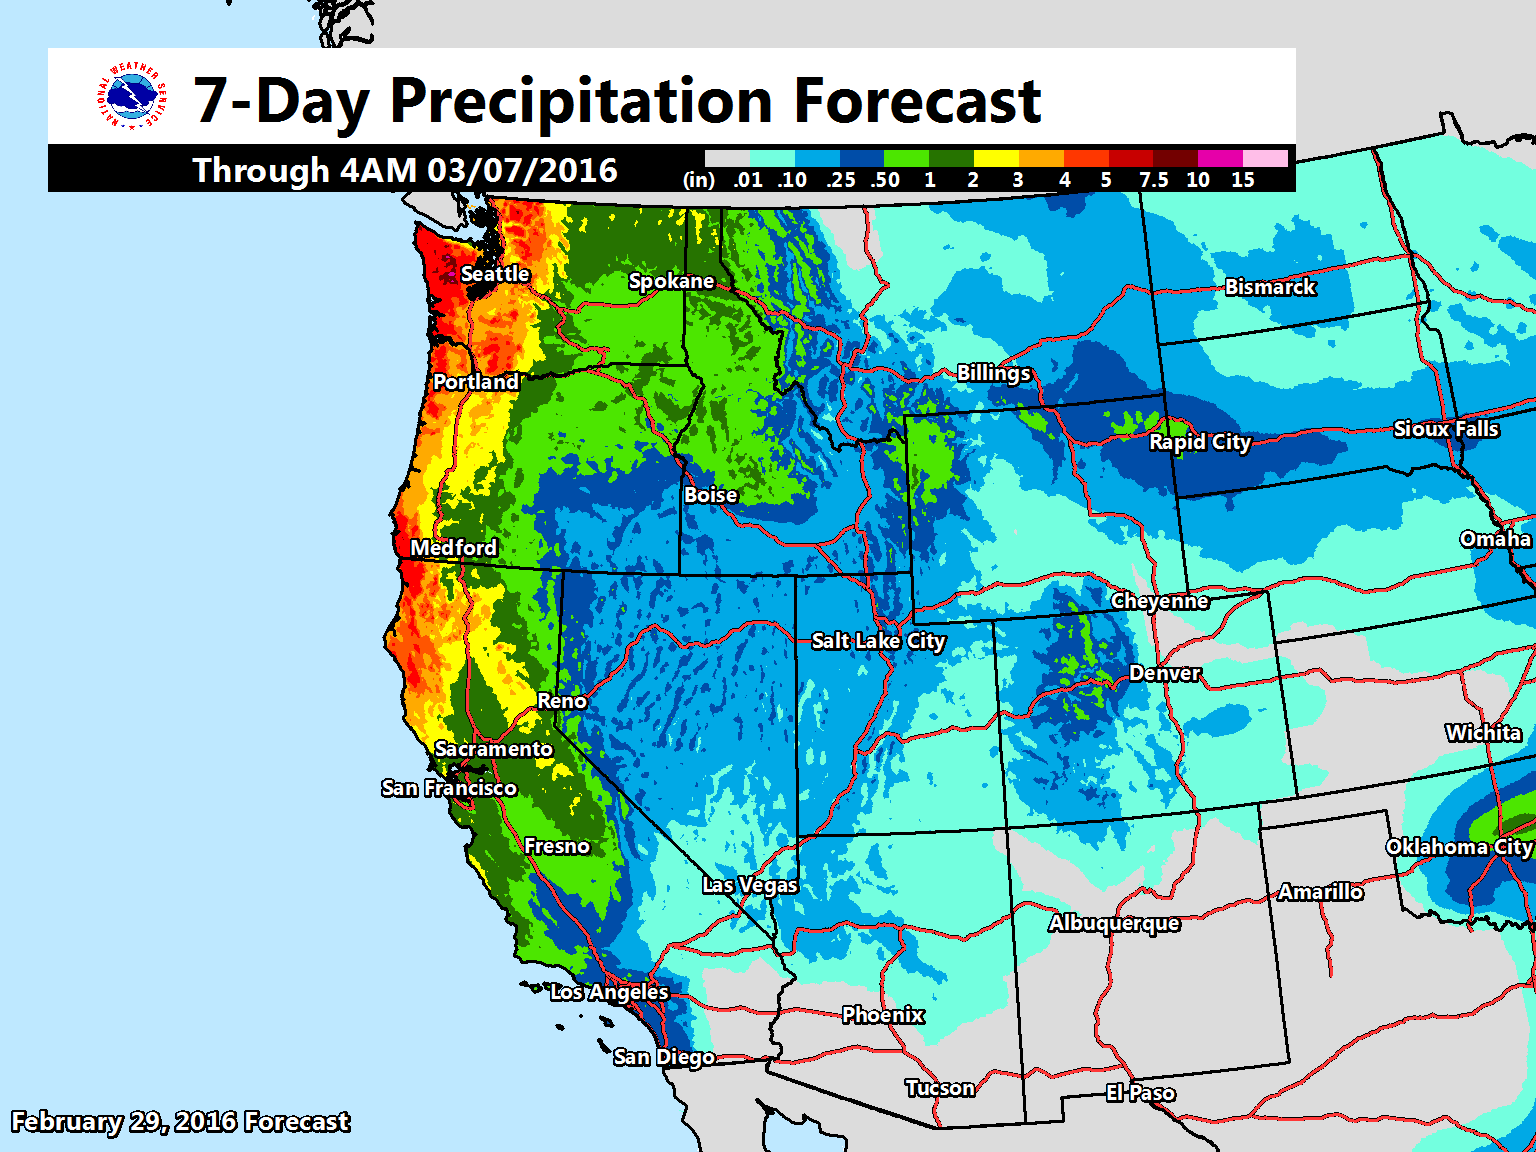 "As has been recently advertised, a more active storm track is becoming more likely and will result in widespread precipitation into this weekend and next week. The image shows the 7-day precipitation forecast across the West." - NOAA, yesterday